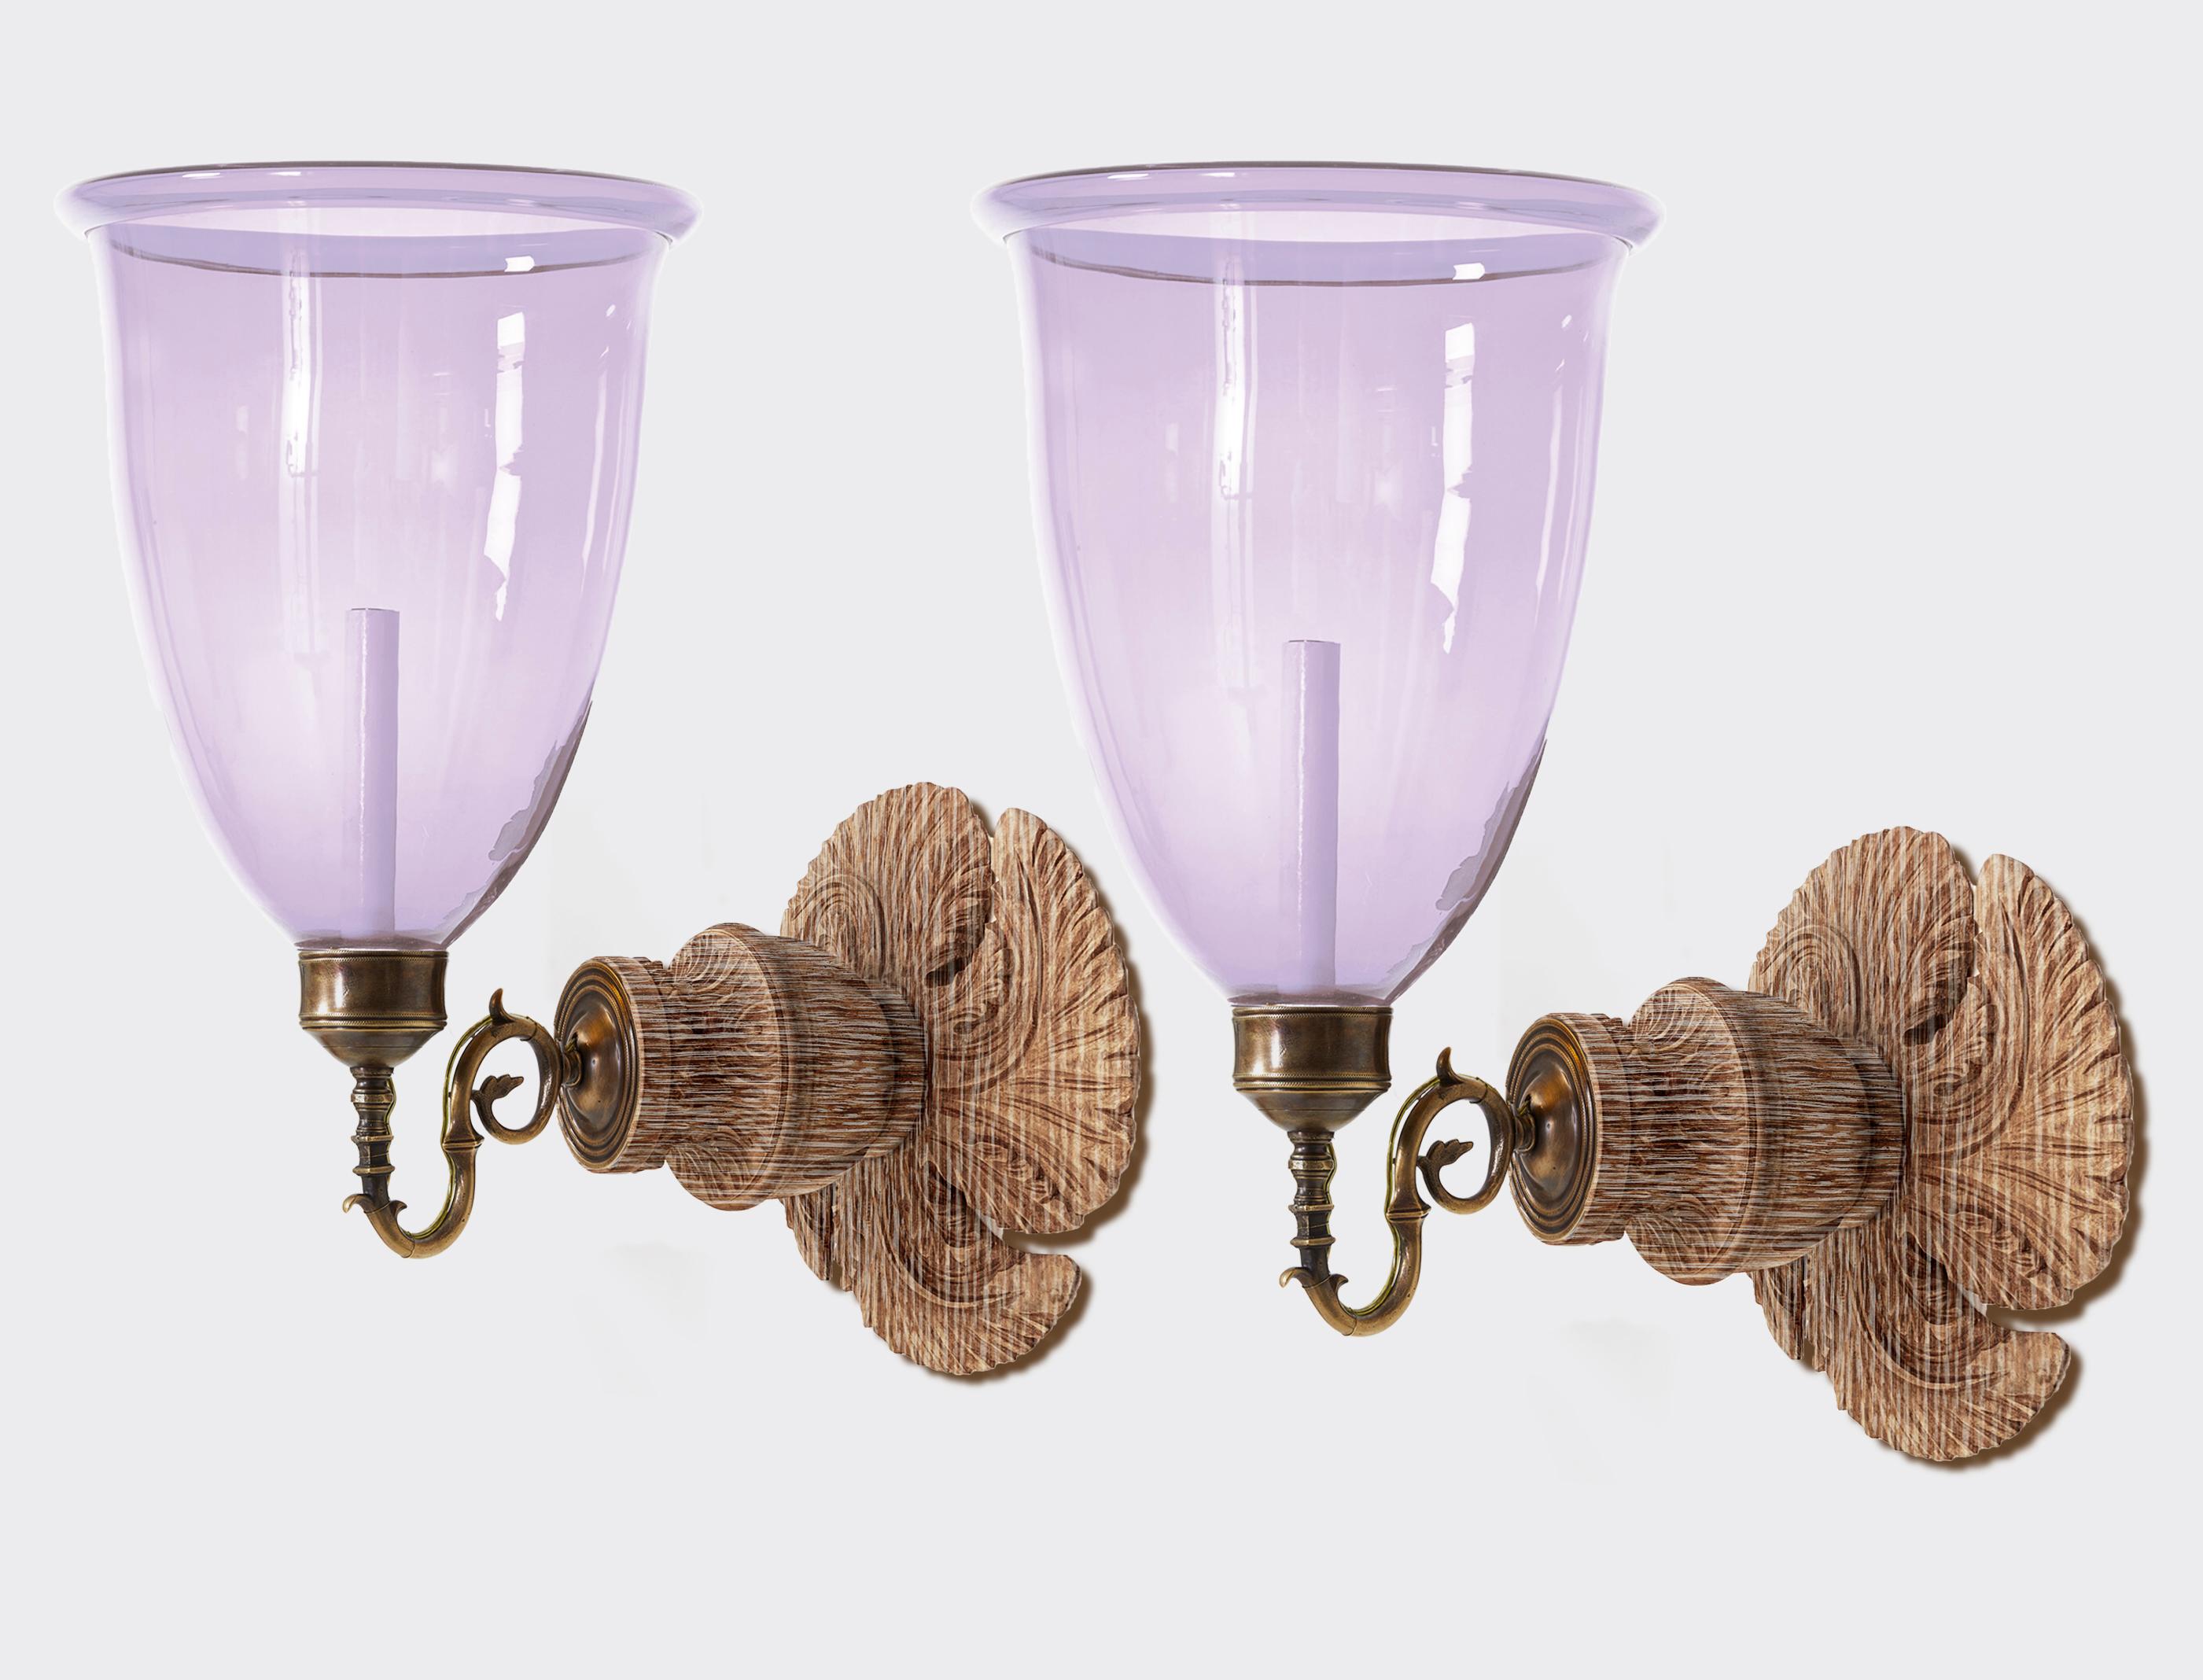 A pair of hand-carved gilt Georgian-styled backplates with patinated brass sconce fittings and large hand-blown lilac glass hurricane shades. Electrified with one candelabra base socket per sconce. Maximum wattage 60 watts incandescent 100 watts